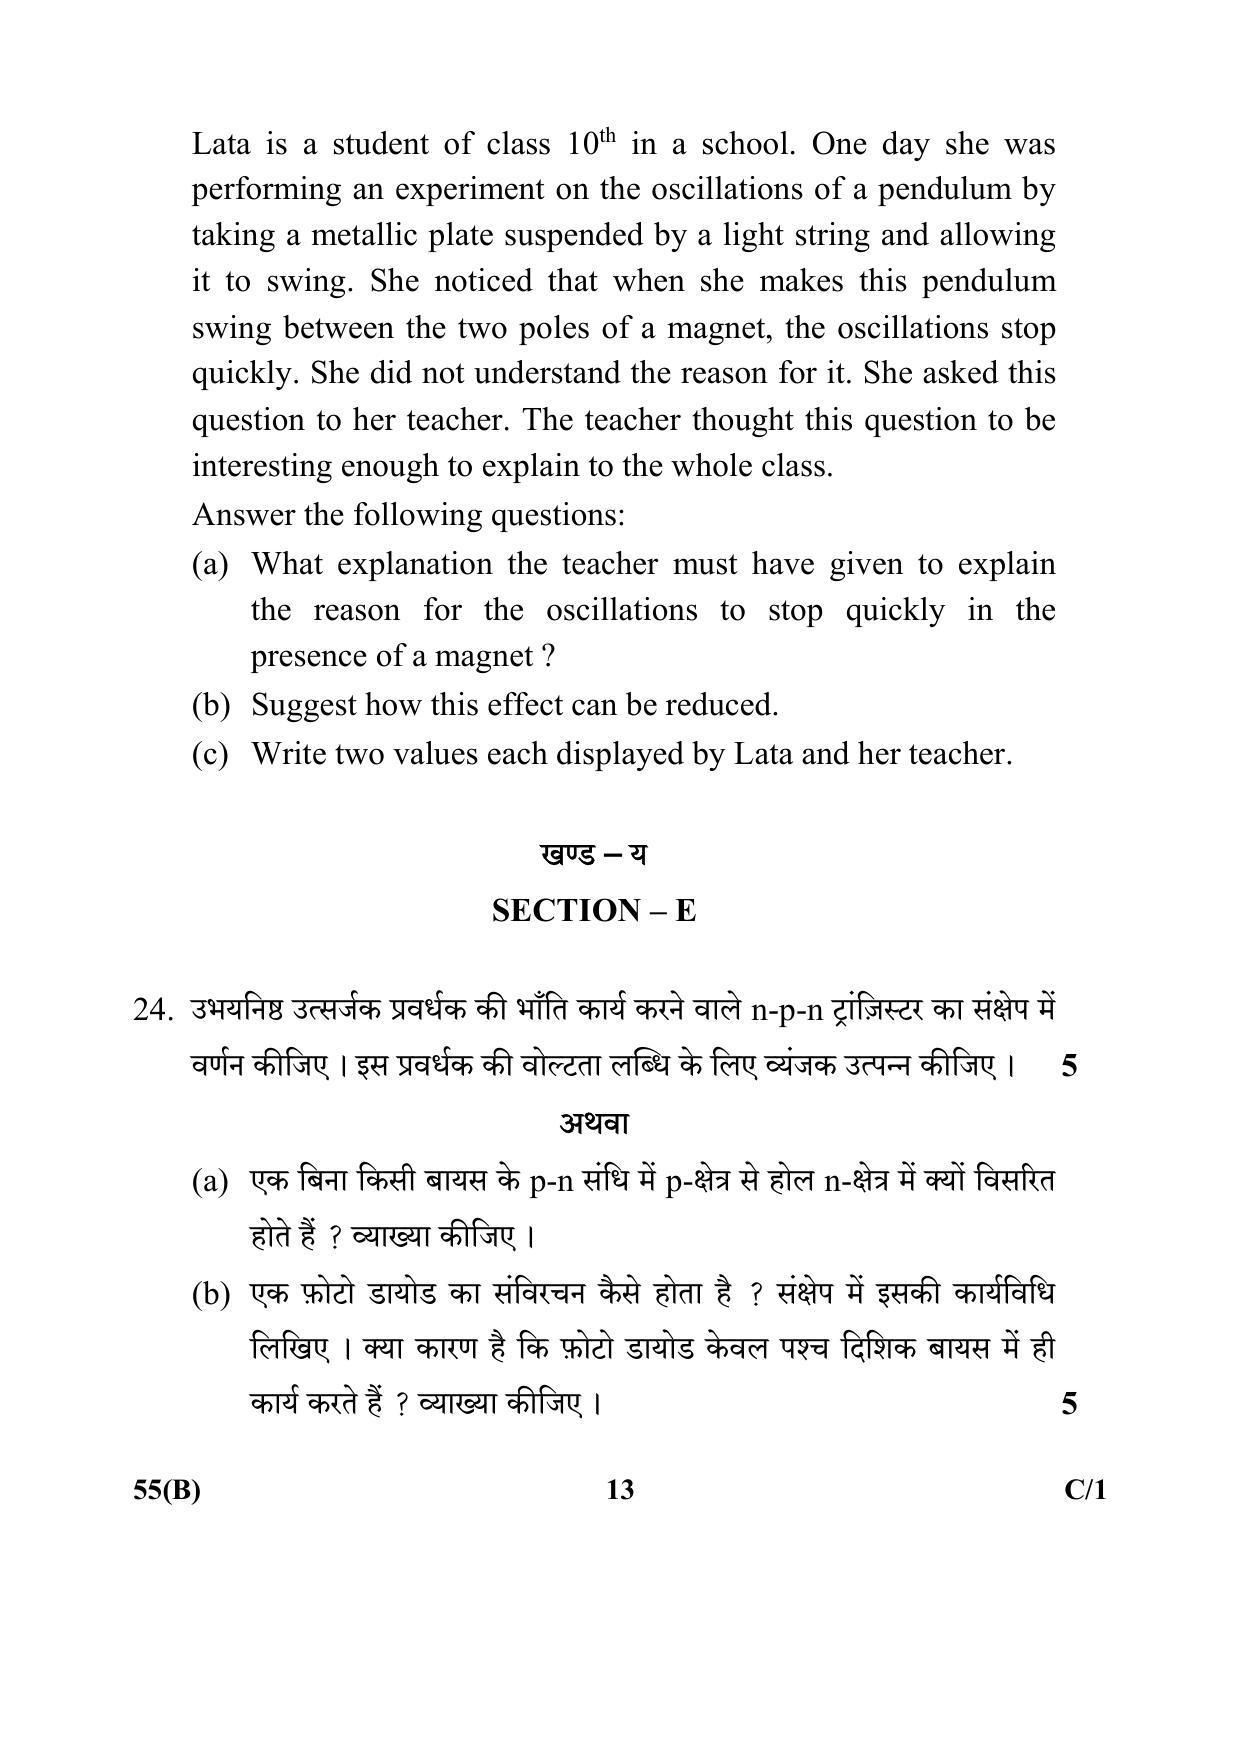 CBSE Class 12 55(B) (Physics) 2018 Compartment Question Paper - Page 13